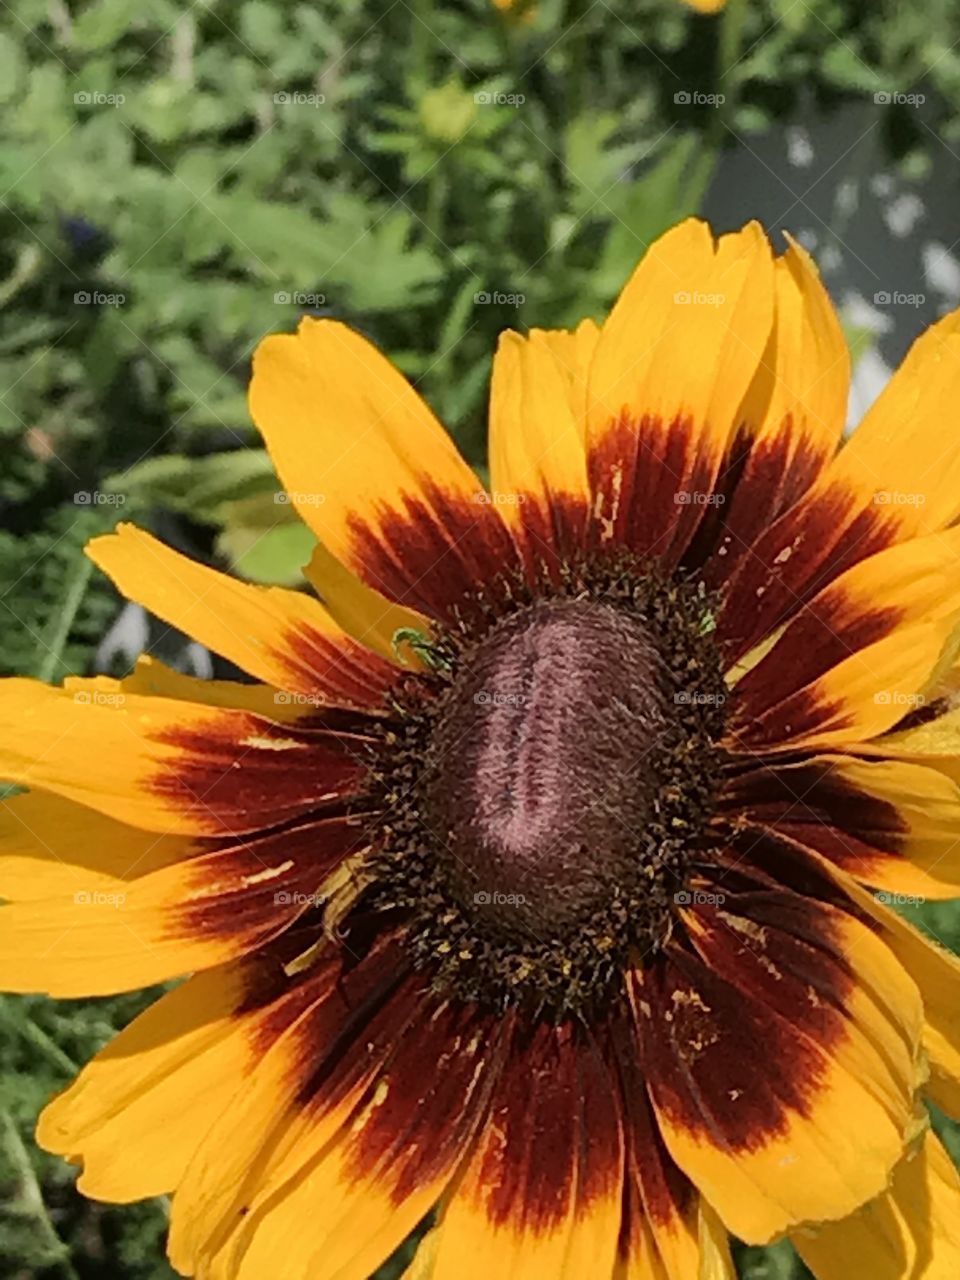 Yellow flower with brown inner petals 